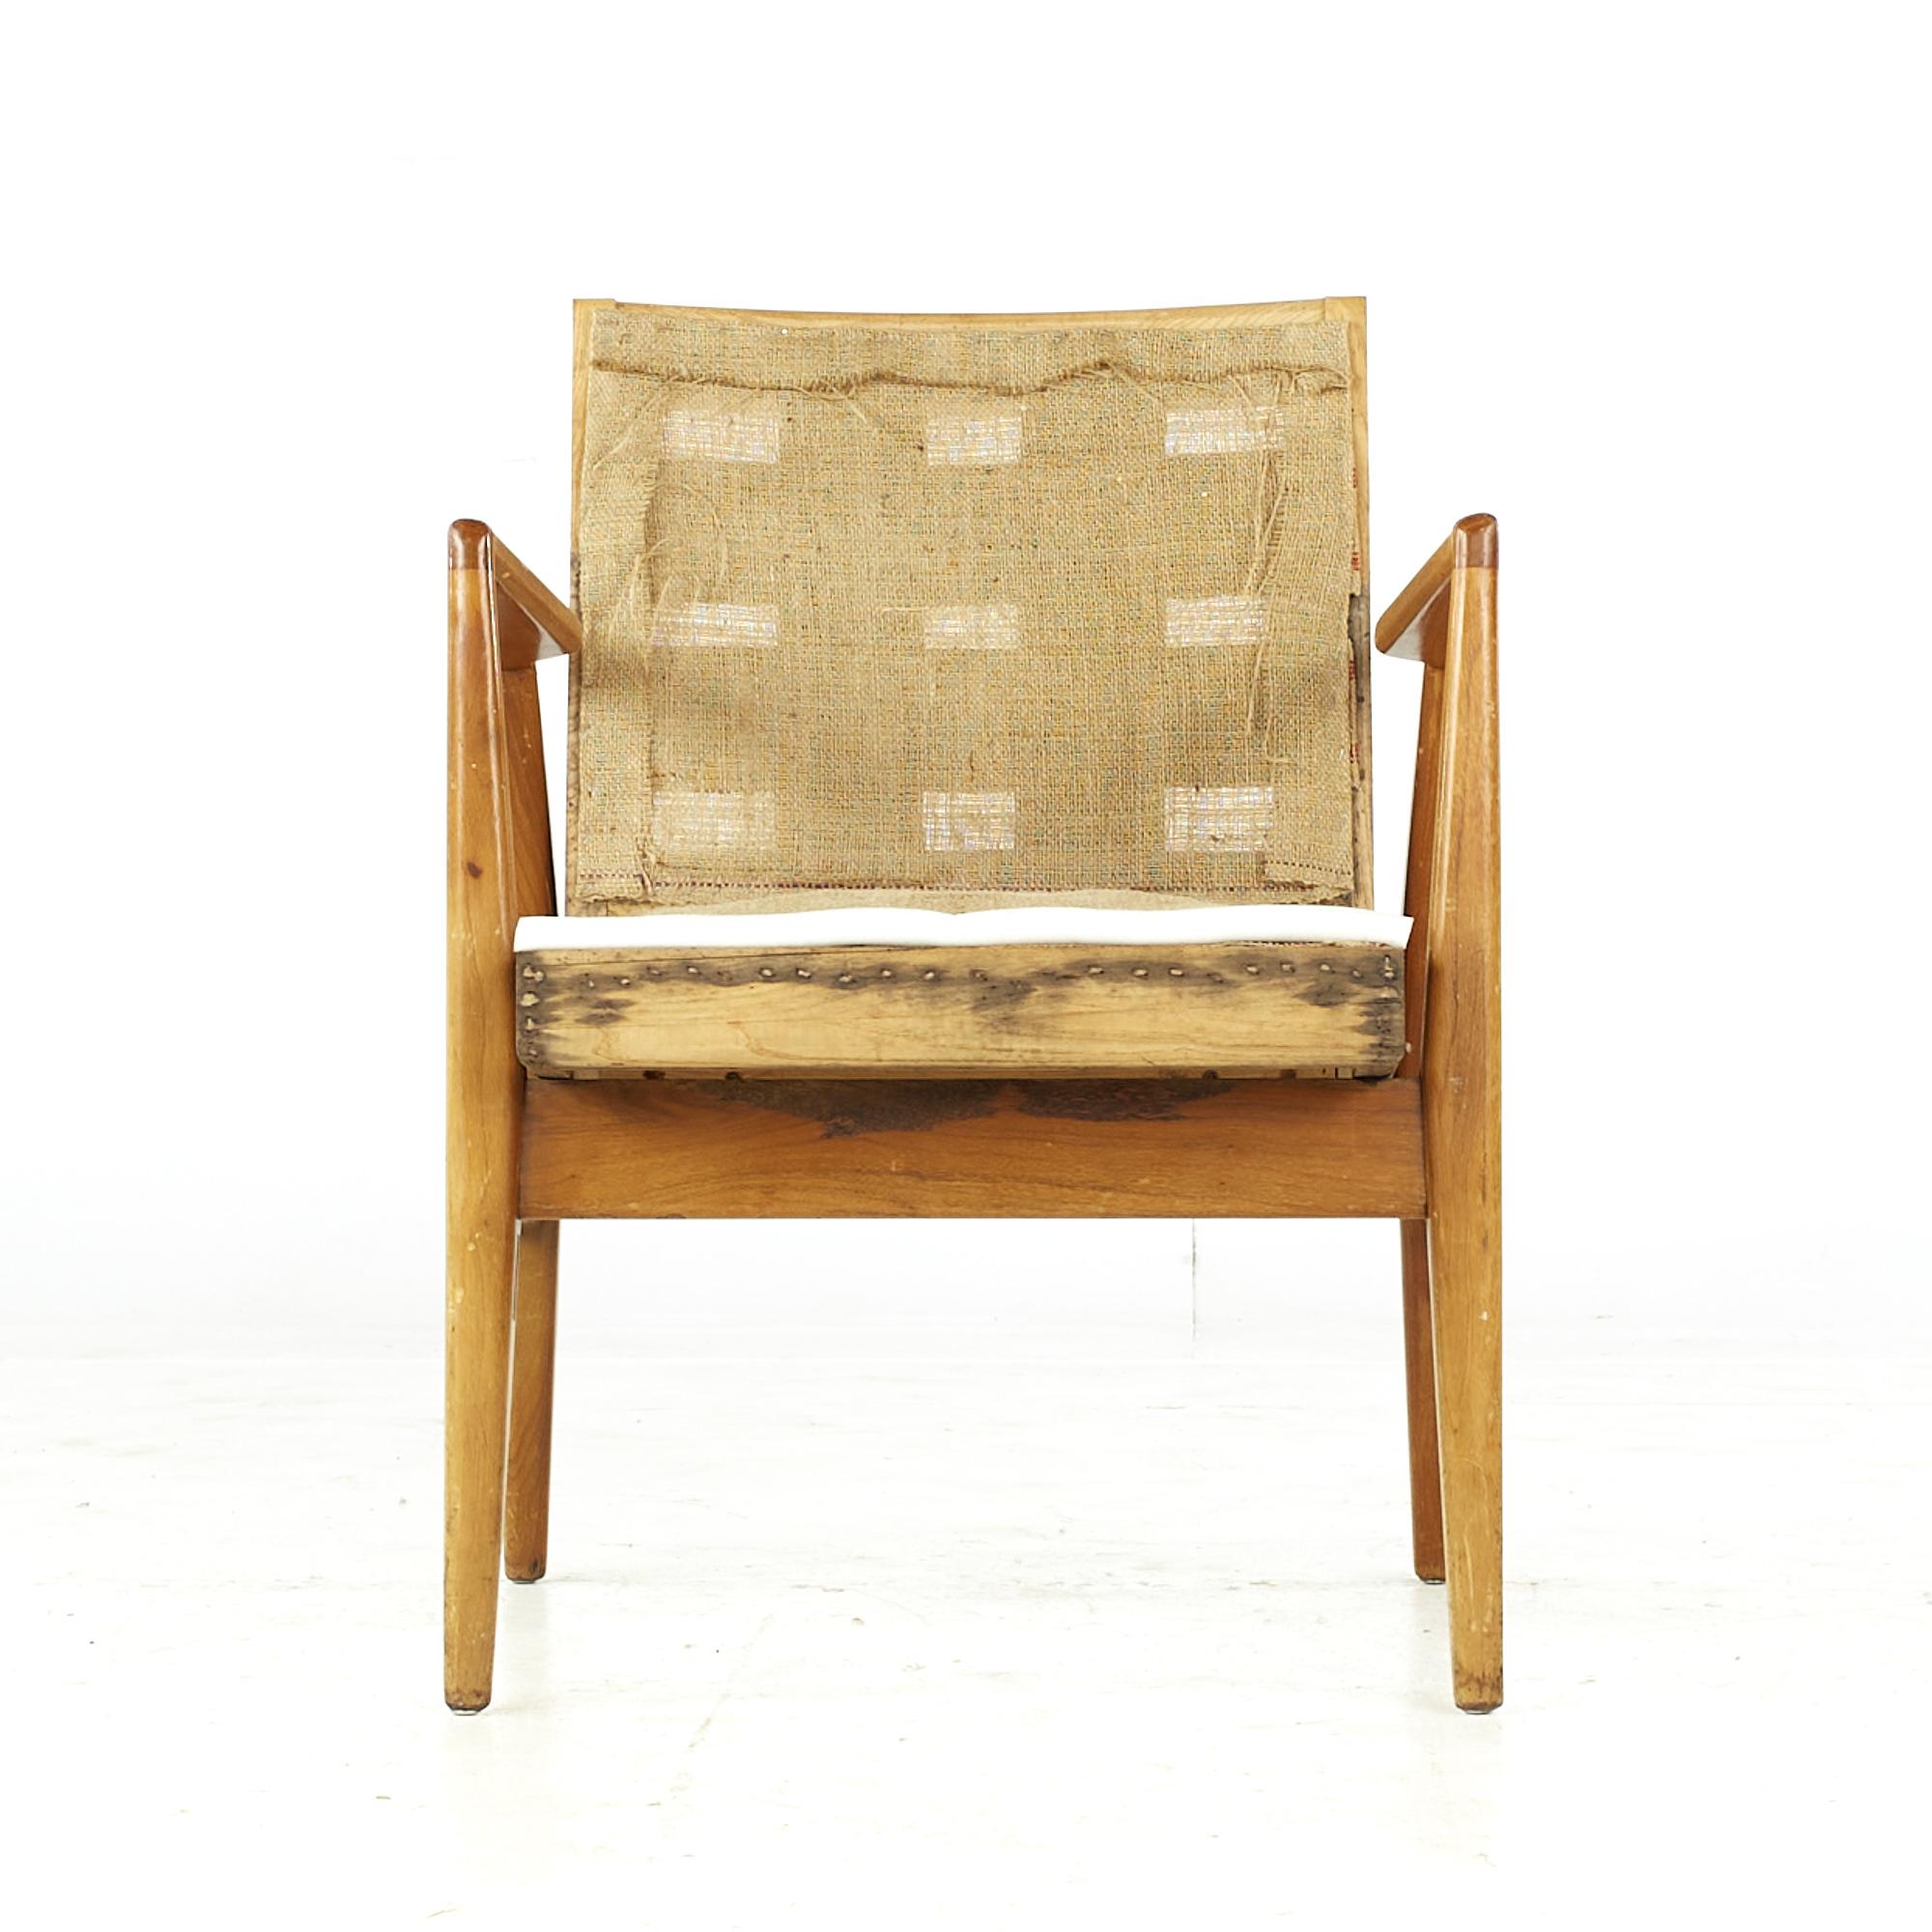 Jens Risom midcentury walnut lounge chair.

This chair measures: 23.25 wide x 24 deep x 31 high, with a seat height of 17.5 and arm height/chair clearance 26 inches.

All pieces of furniture can be had in what we call restored vintage condition.